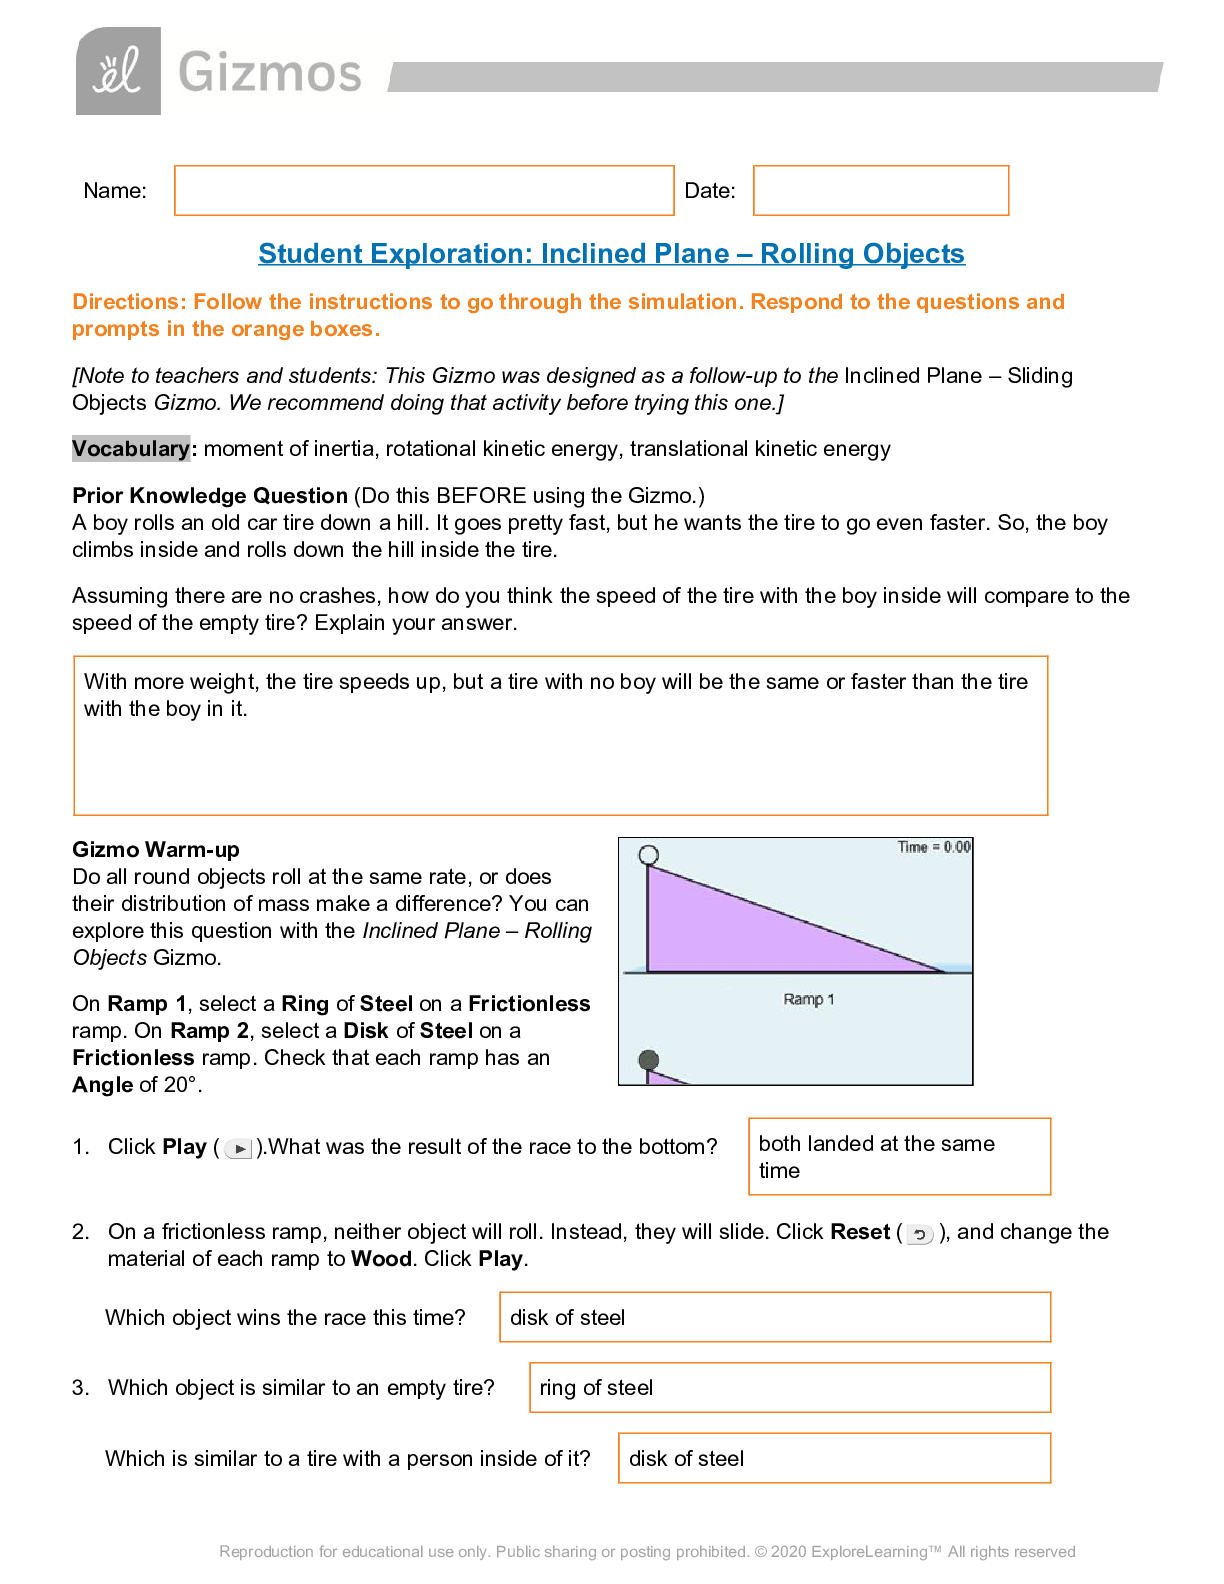 gizmo-inclined-plane-rolling-objects-all-answers-100-graded-a-doc-browsegrades